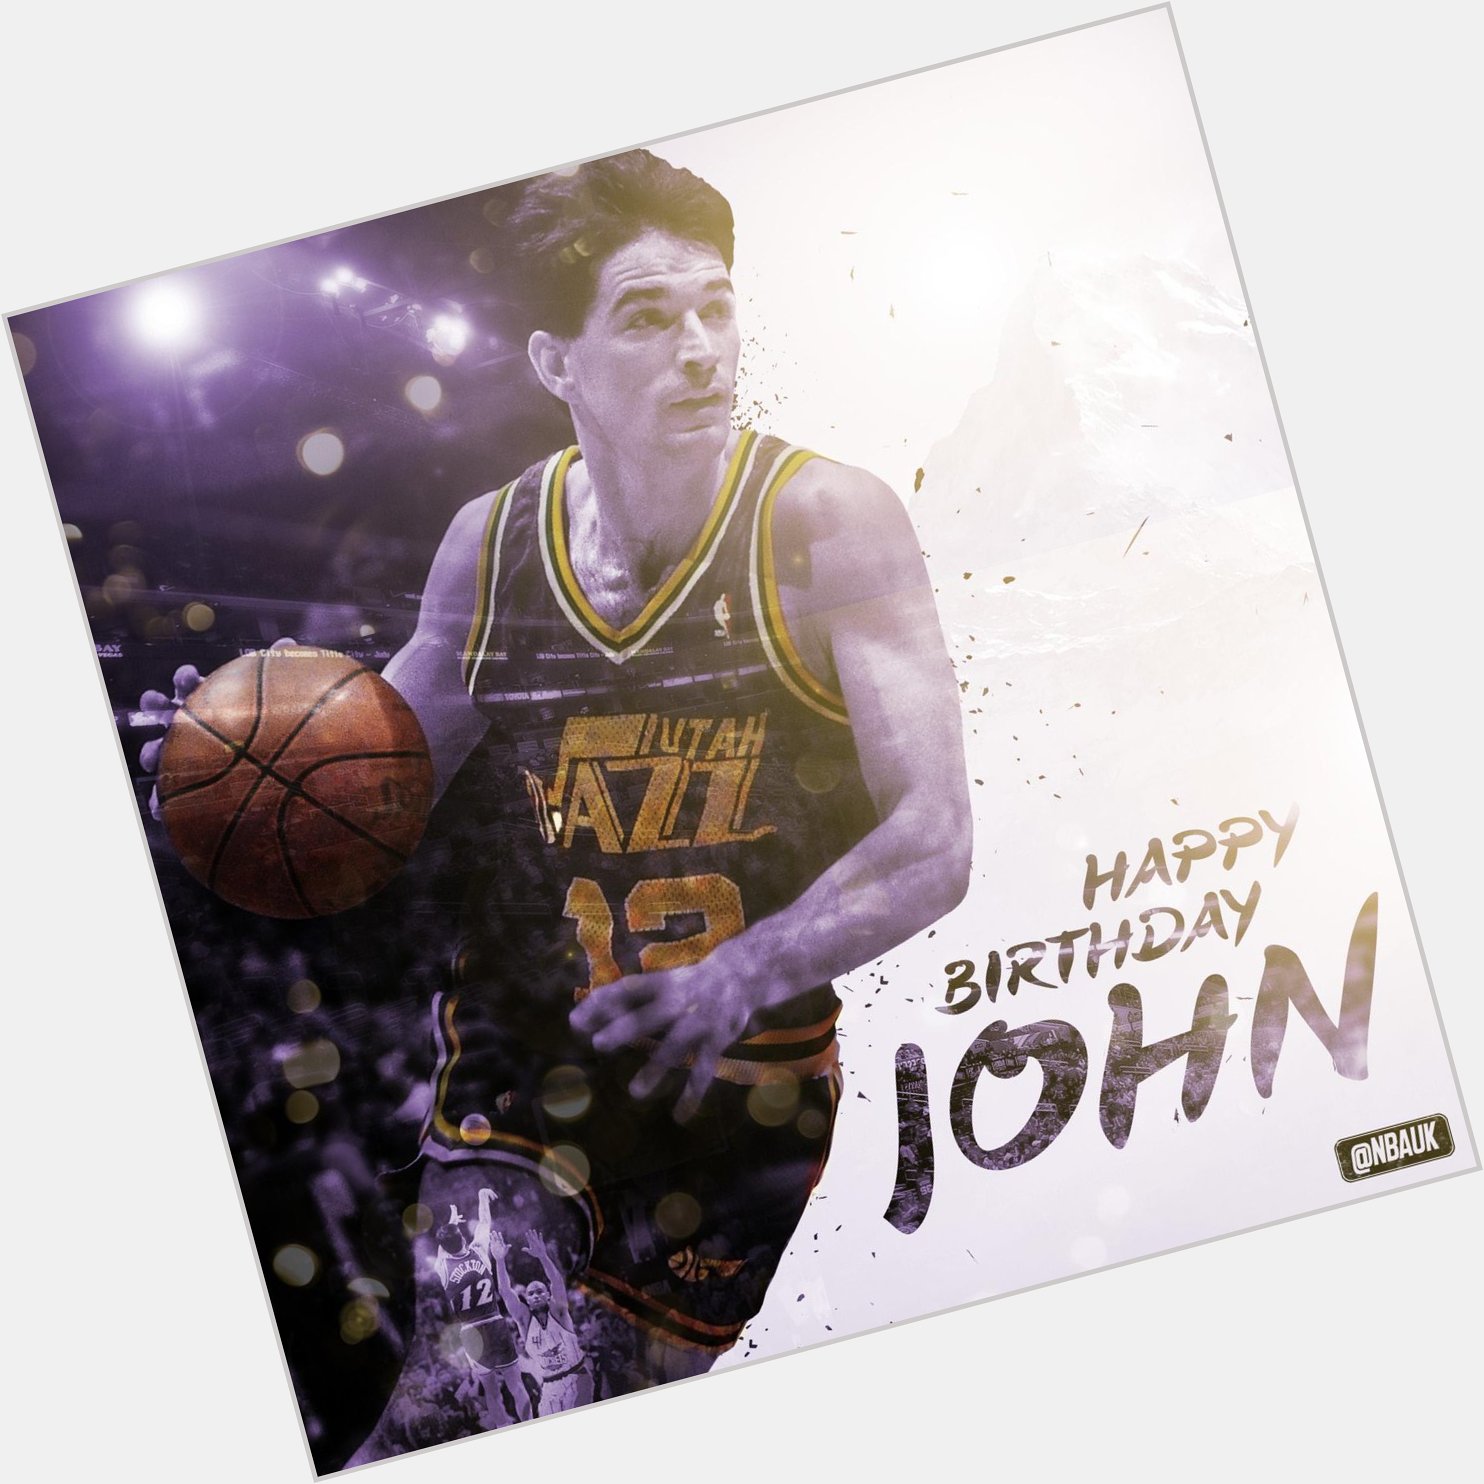 Happy Birthday to John Stockton! The all-time NBA leader in assists and steals!! 